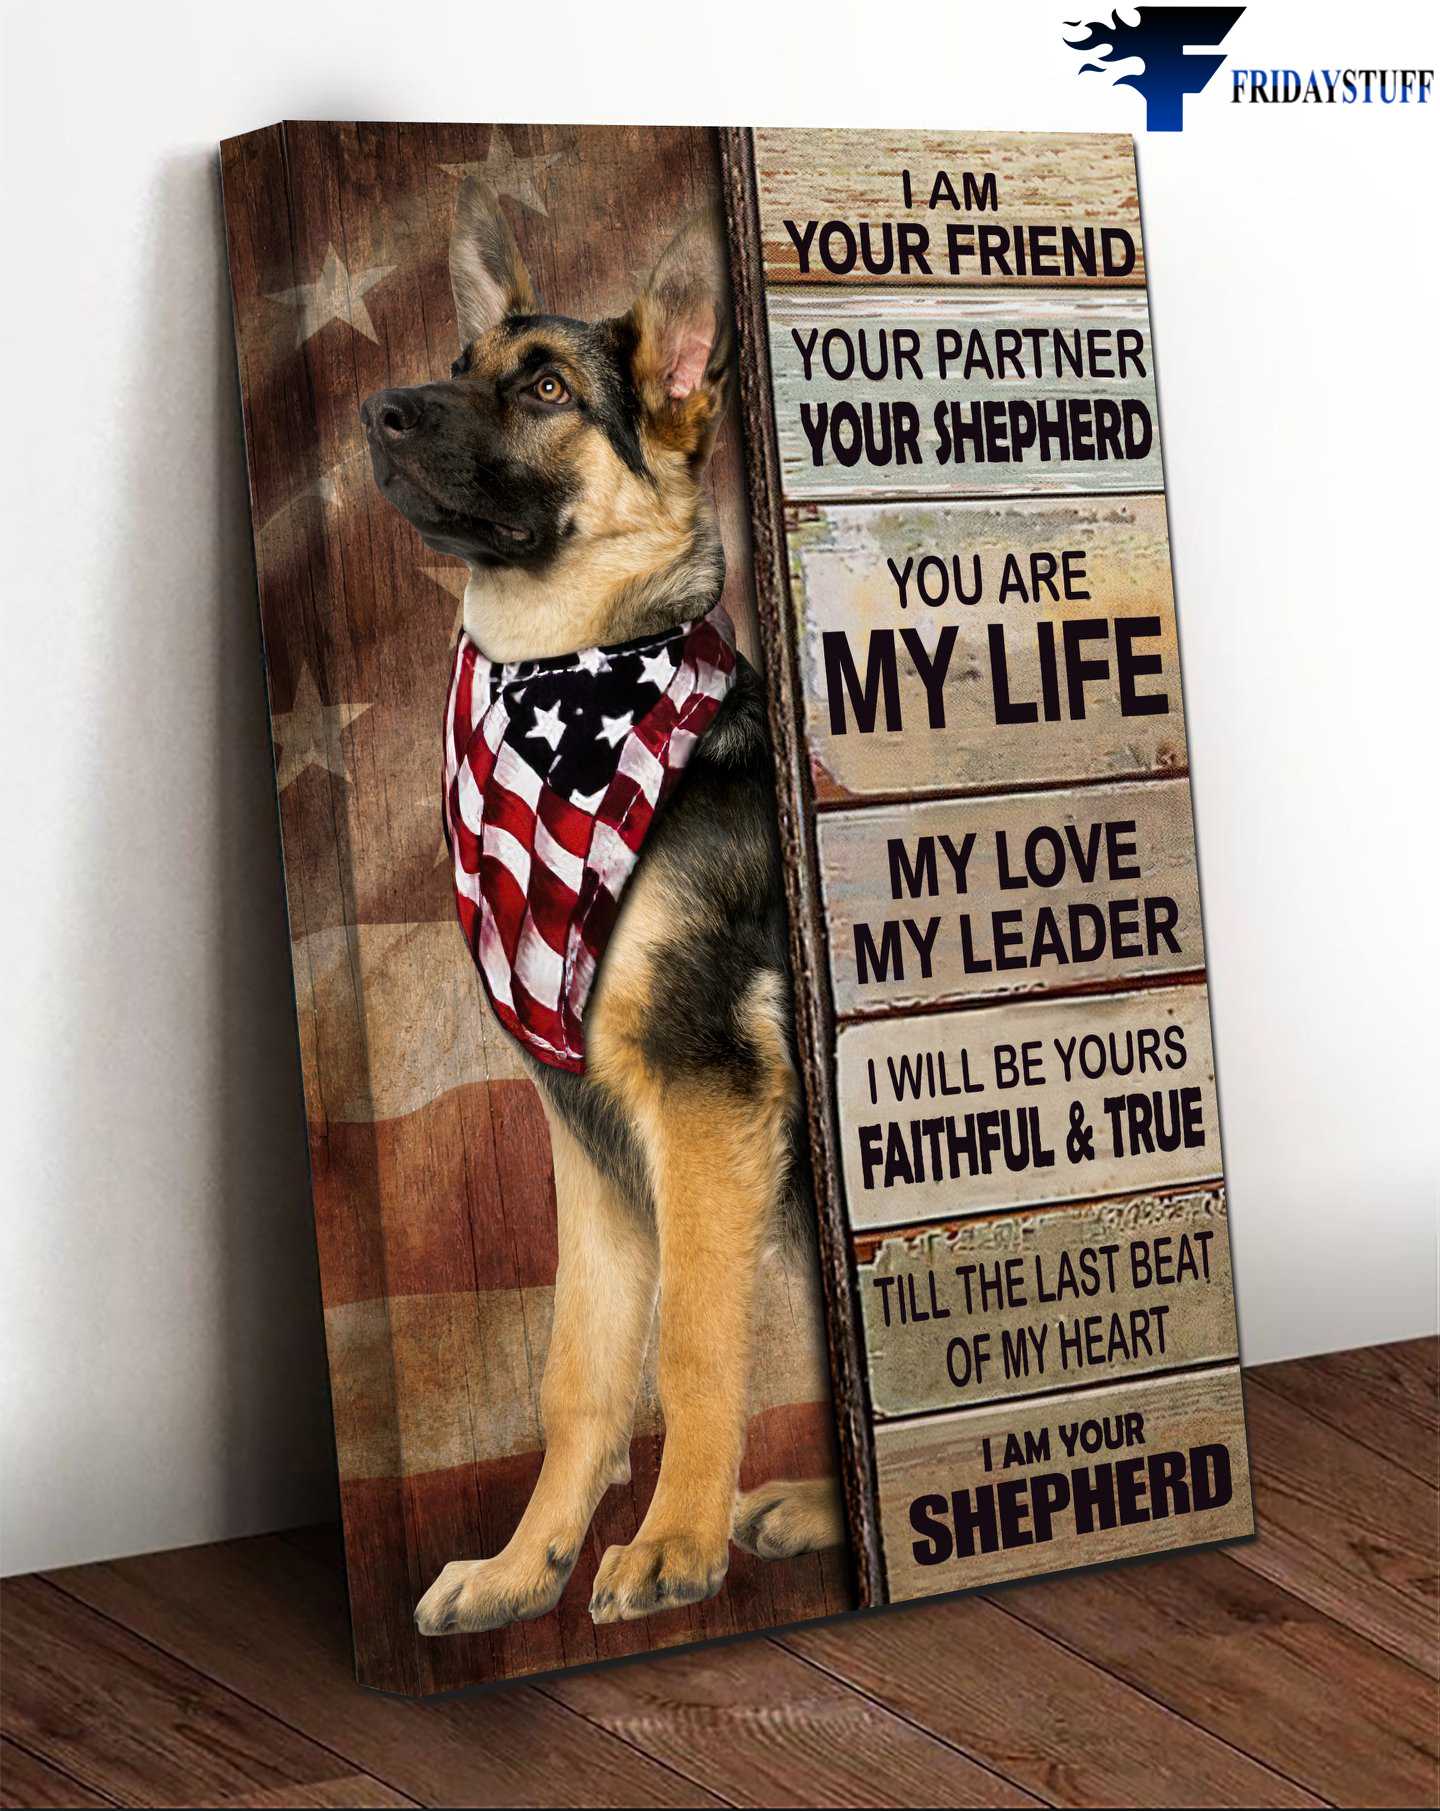 American Dog, Shepherd Dog - I Am Your Friend, Your Partner, Your Shepherd, You Are My Life, My Love, My Leader, I Will Be Your Faithful And True, Till The Last Beat Of My Heart, I Am Your Shepherd